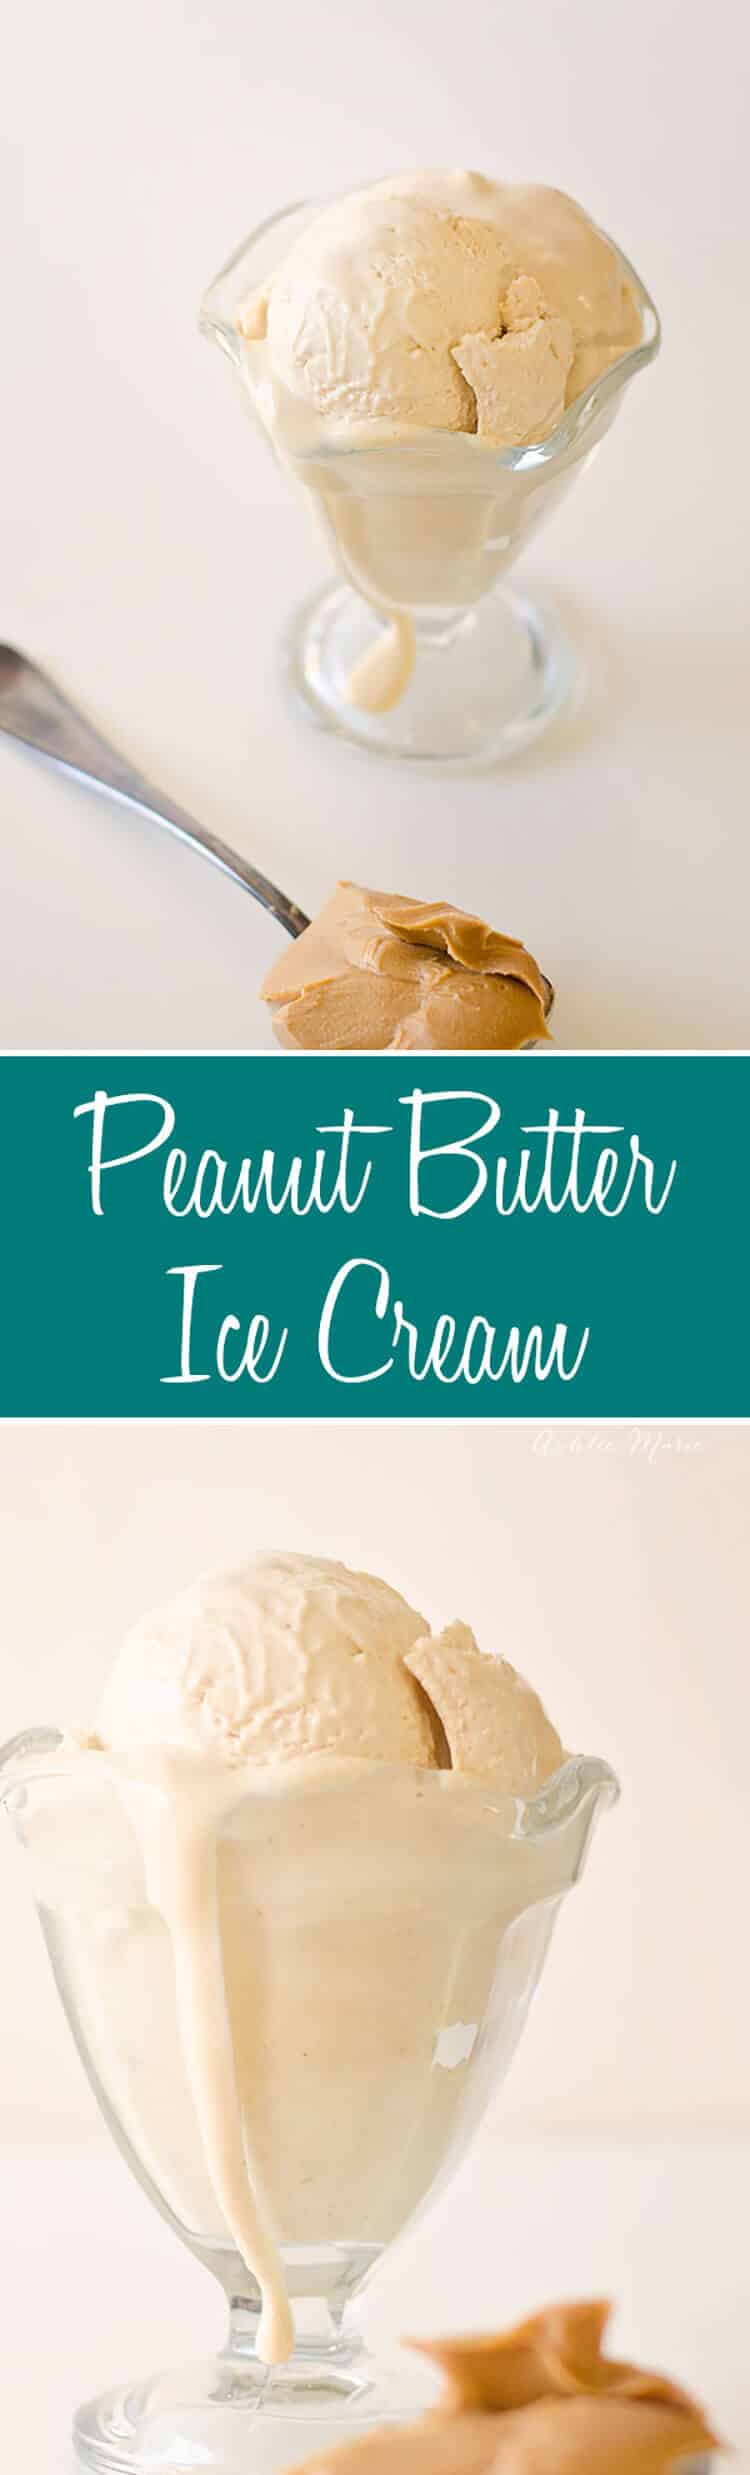 this creamy peanut butter ice cream is always a huge hit. I get requests for it all the time